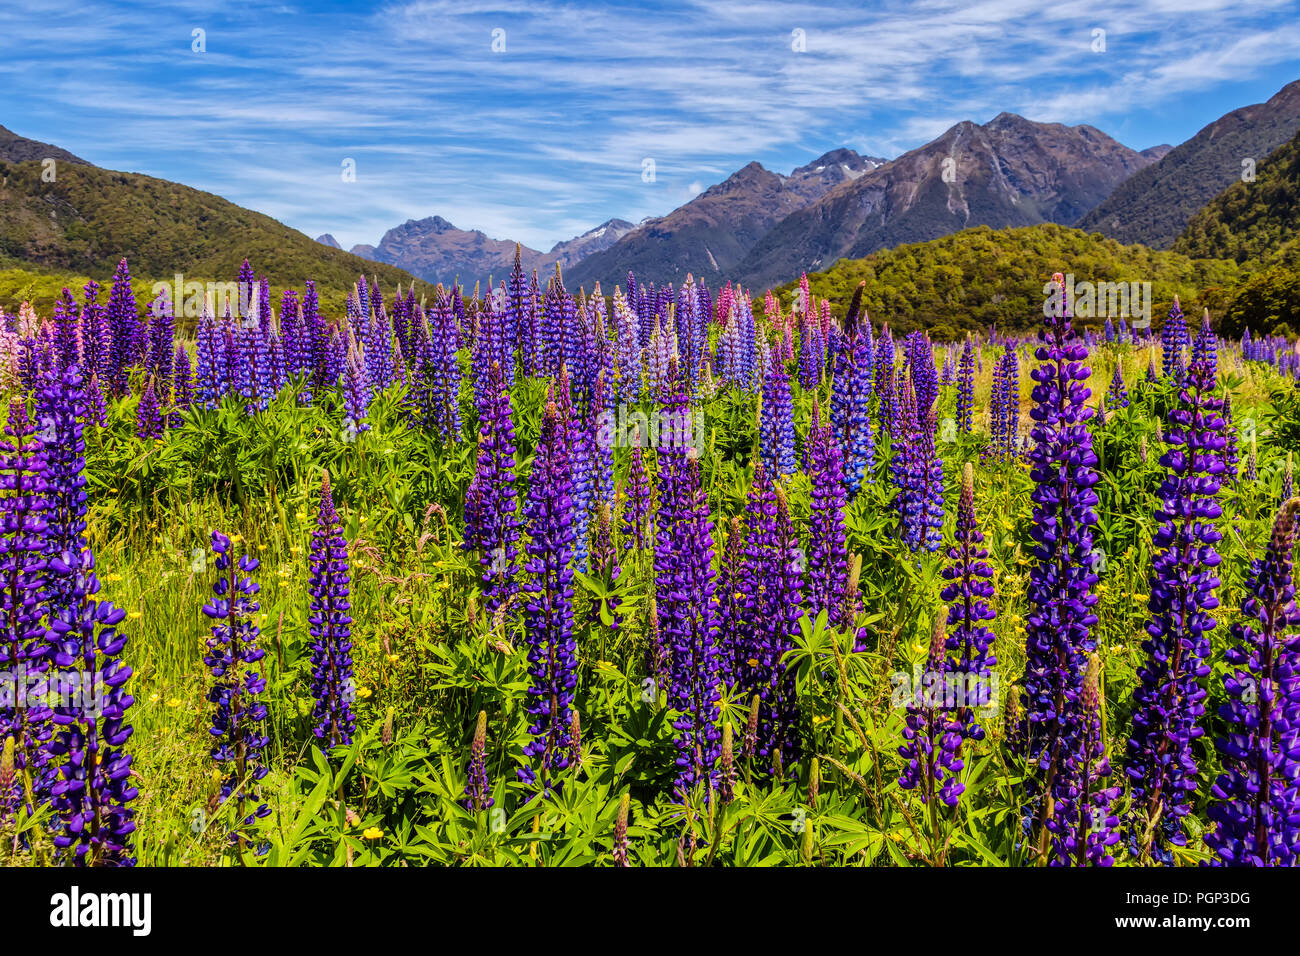 Lupine field in front of the Southern Alps in New Zealand. Stock Photo